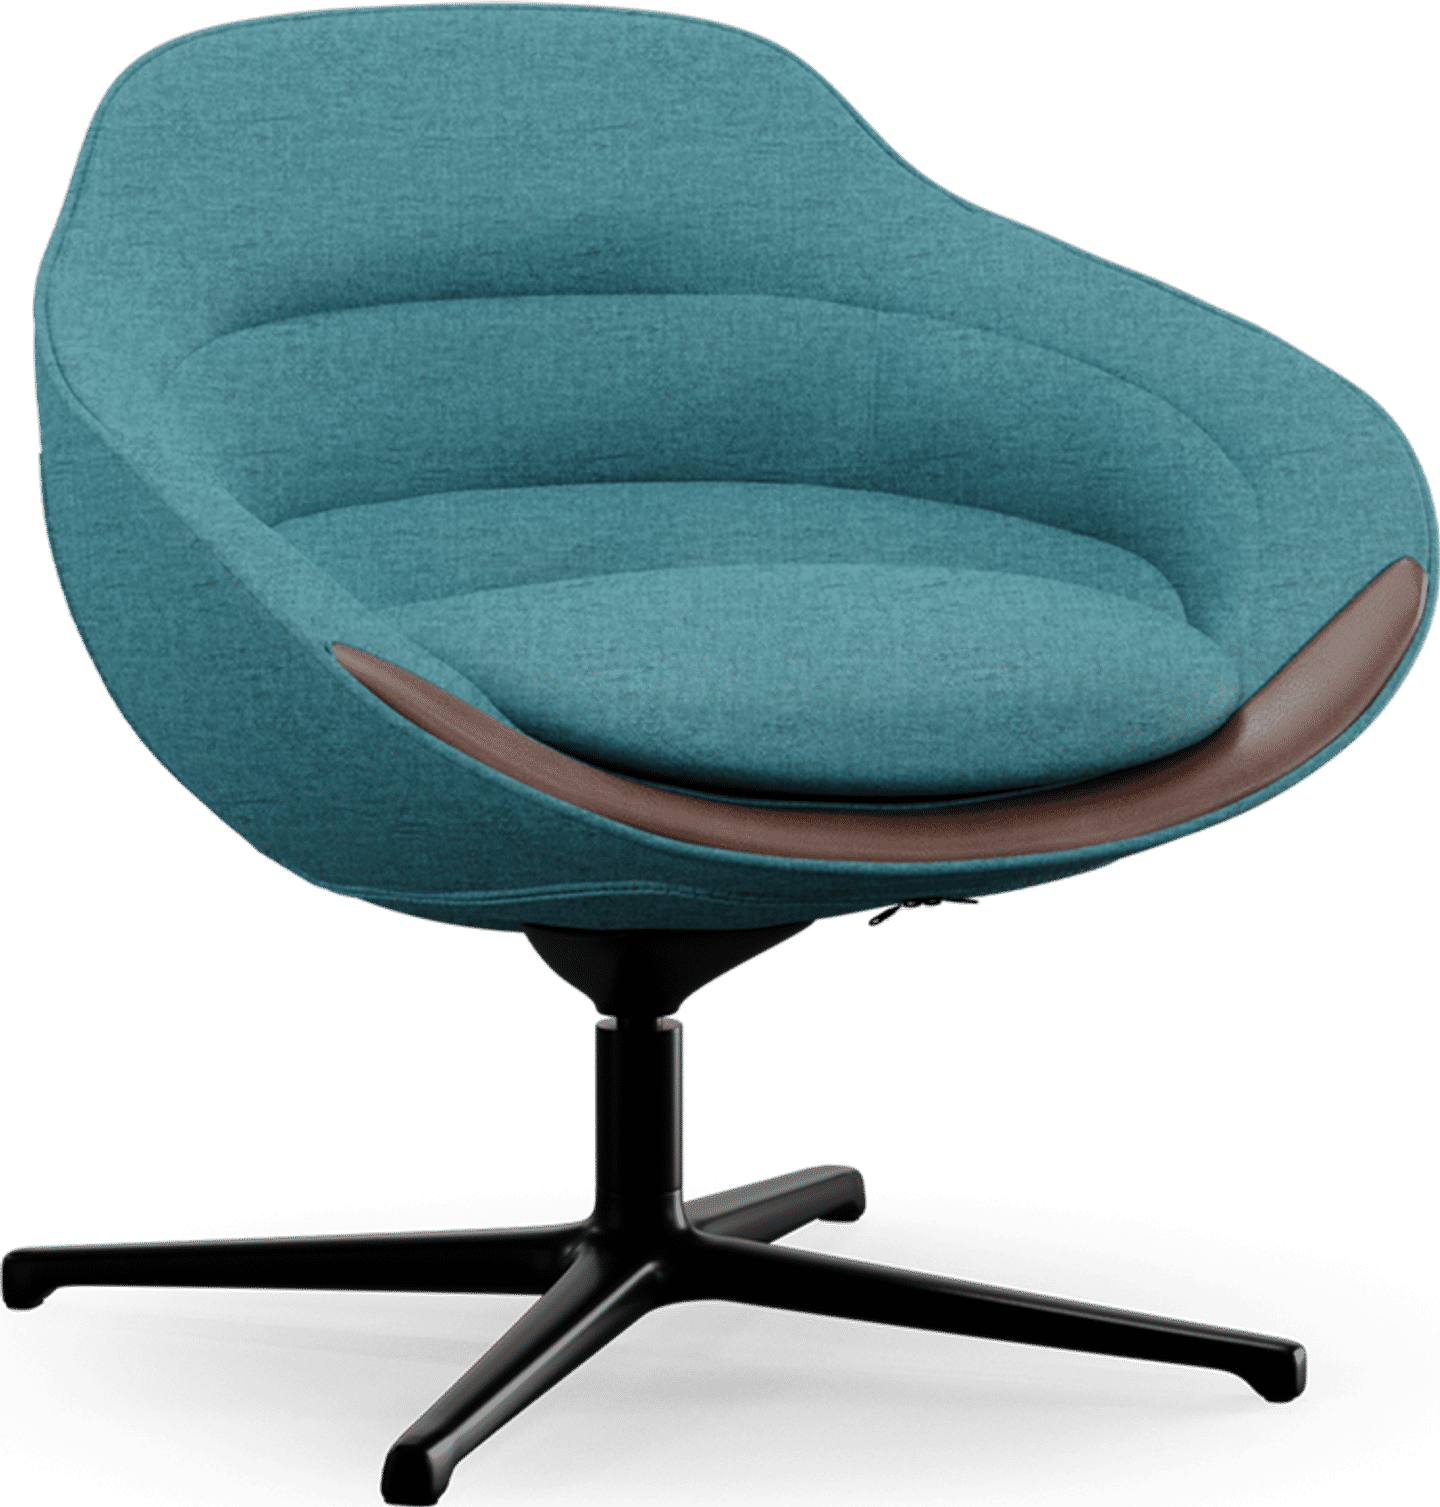 Chaise longue Bugsy Blue image.